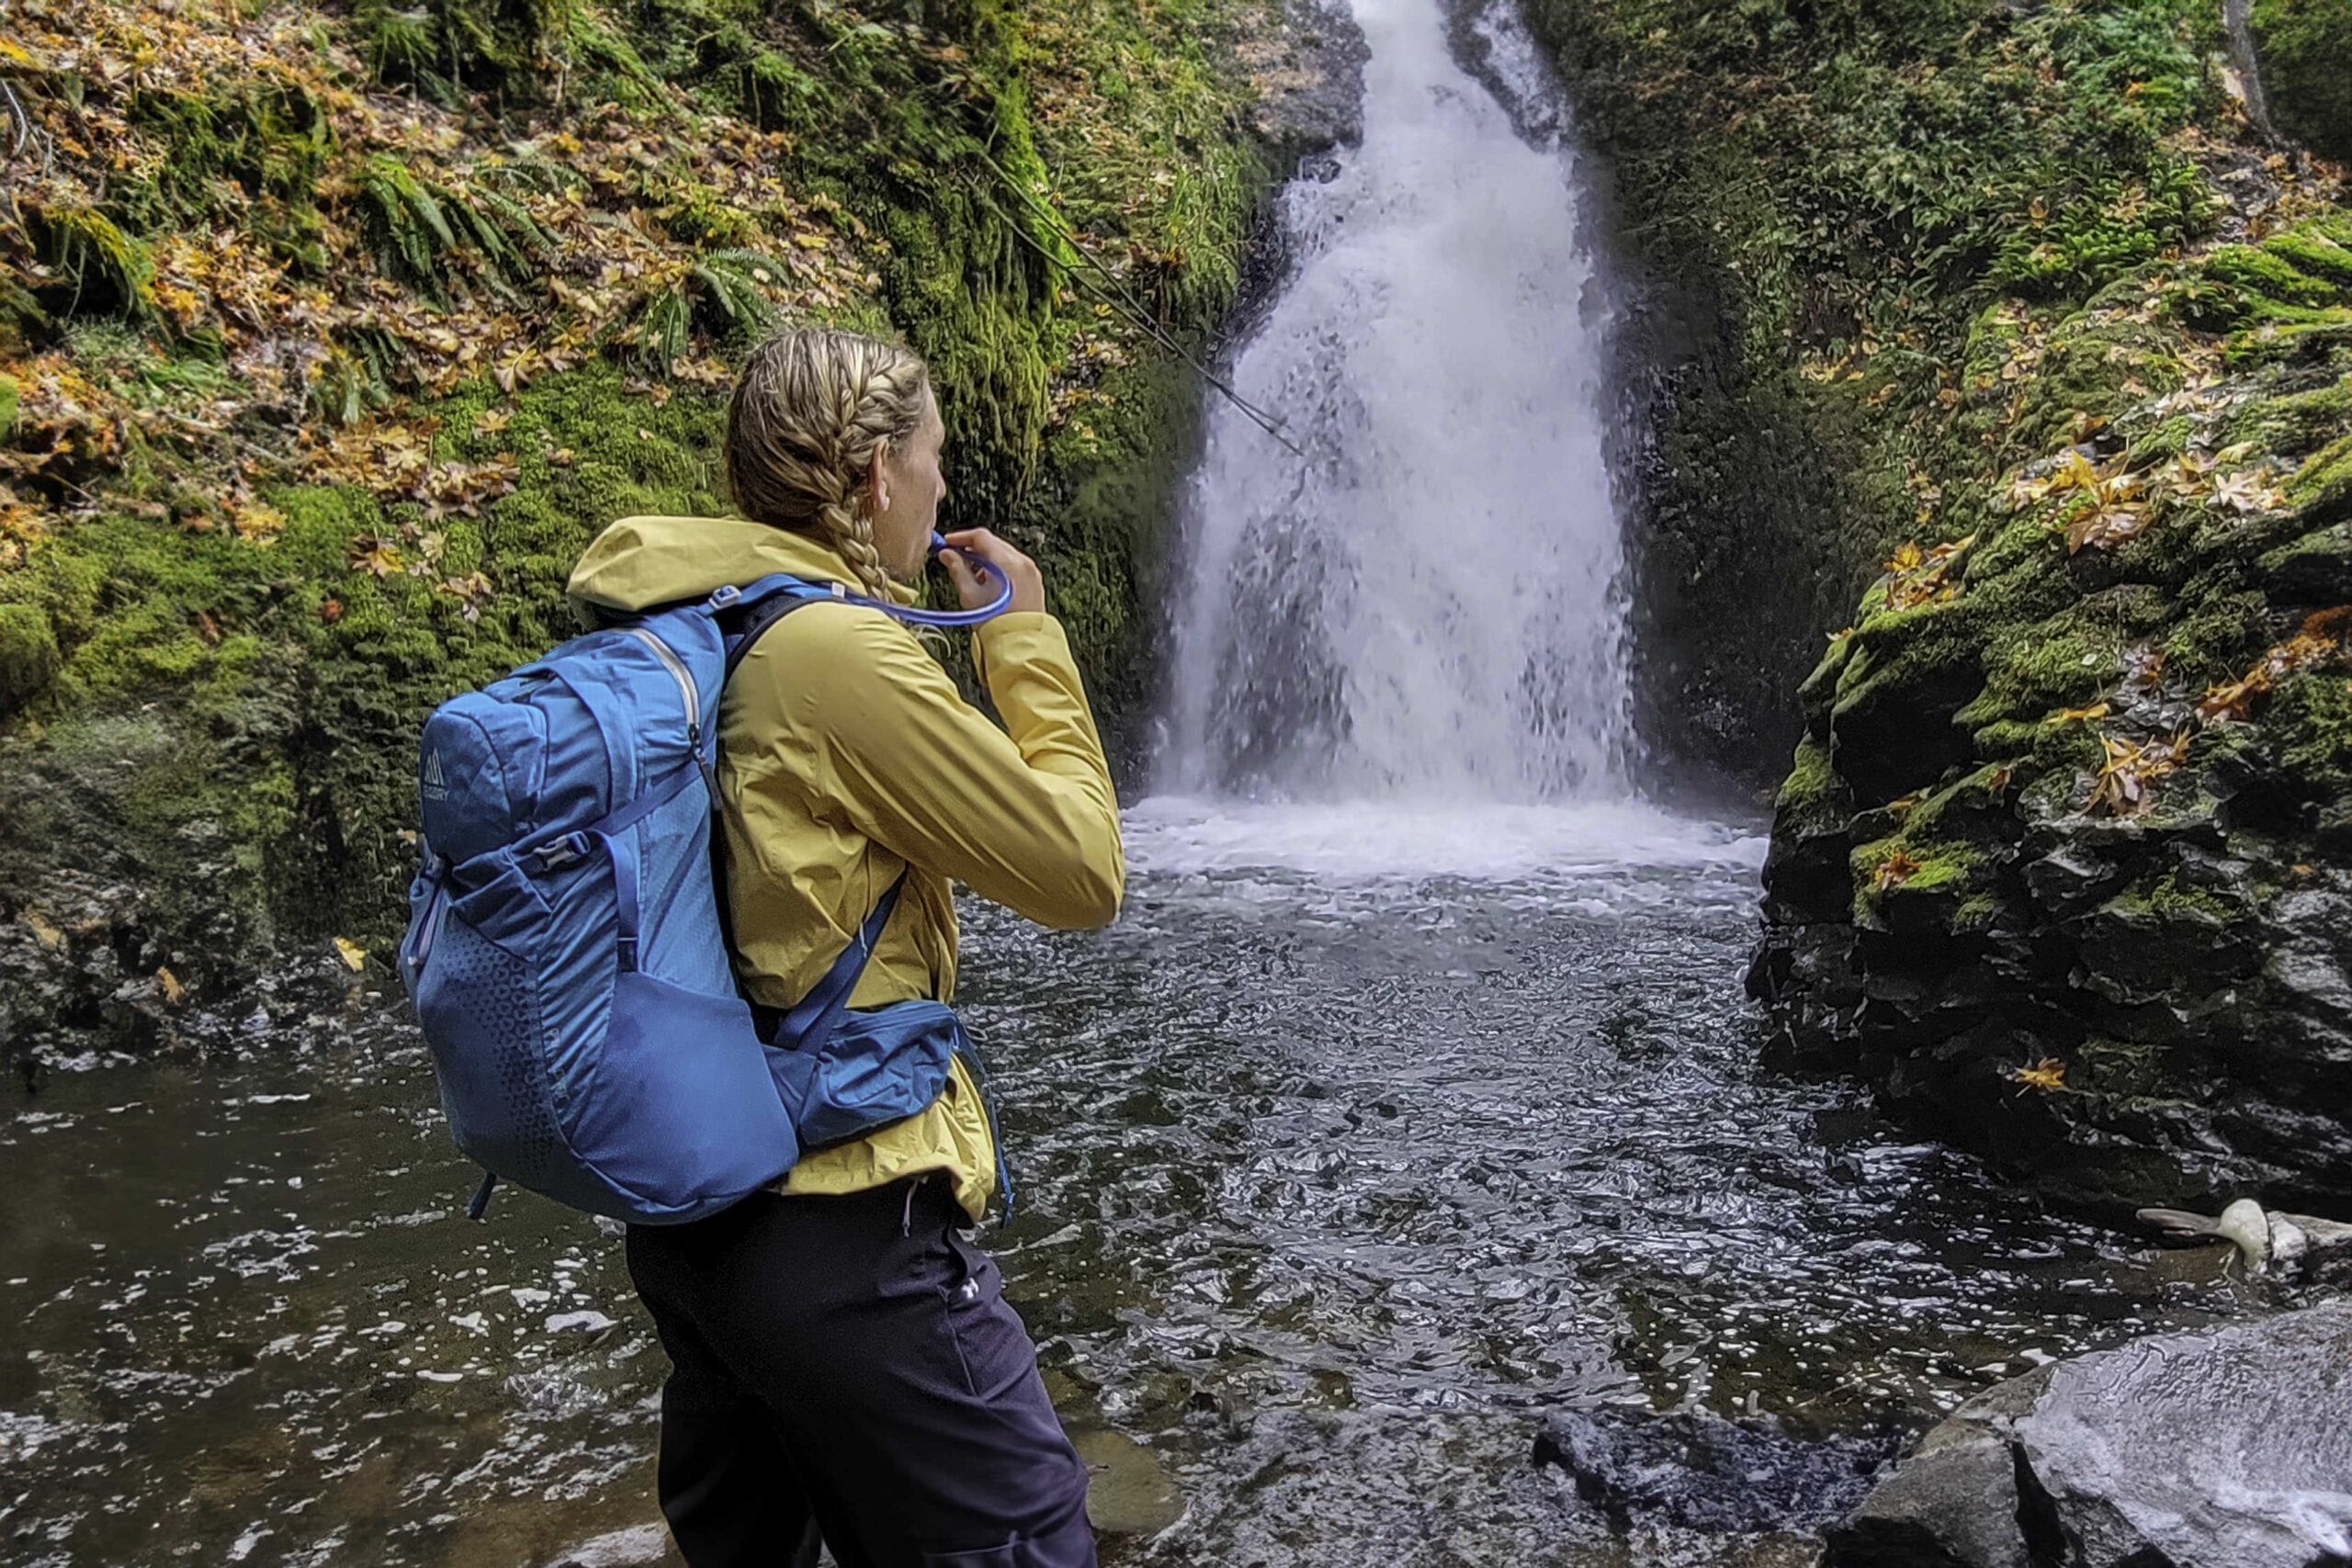 A hiker in front of a waterfall with the Gregory Juno 24 H2O hydration pack